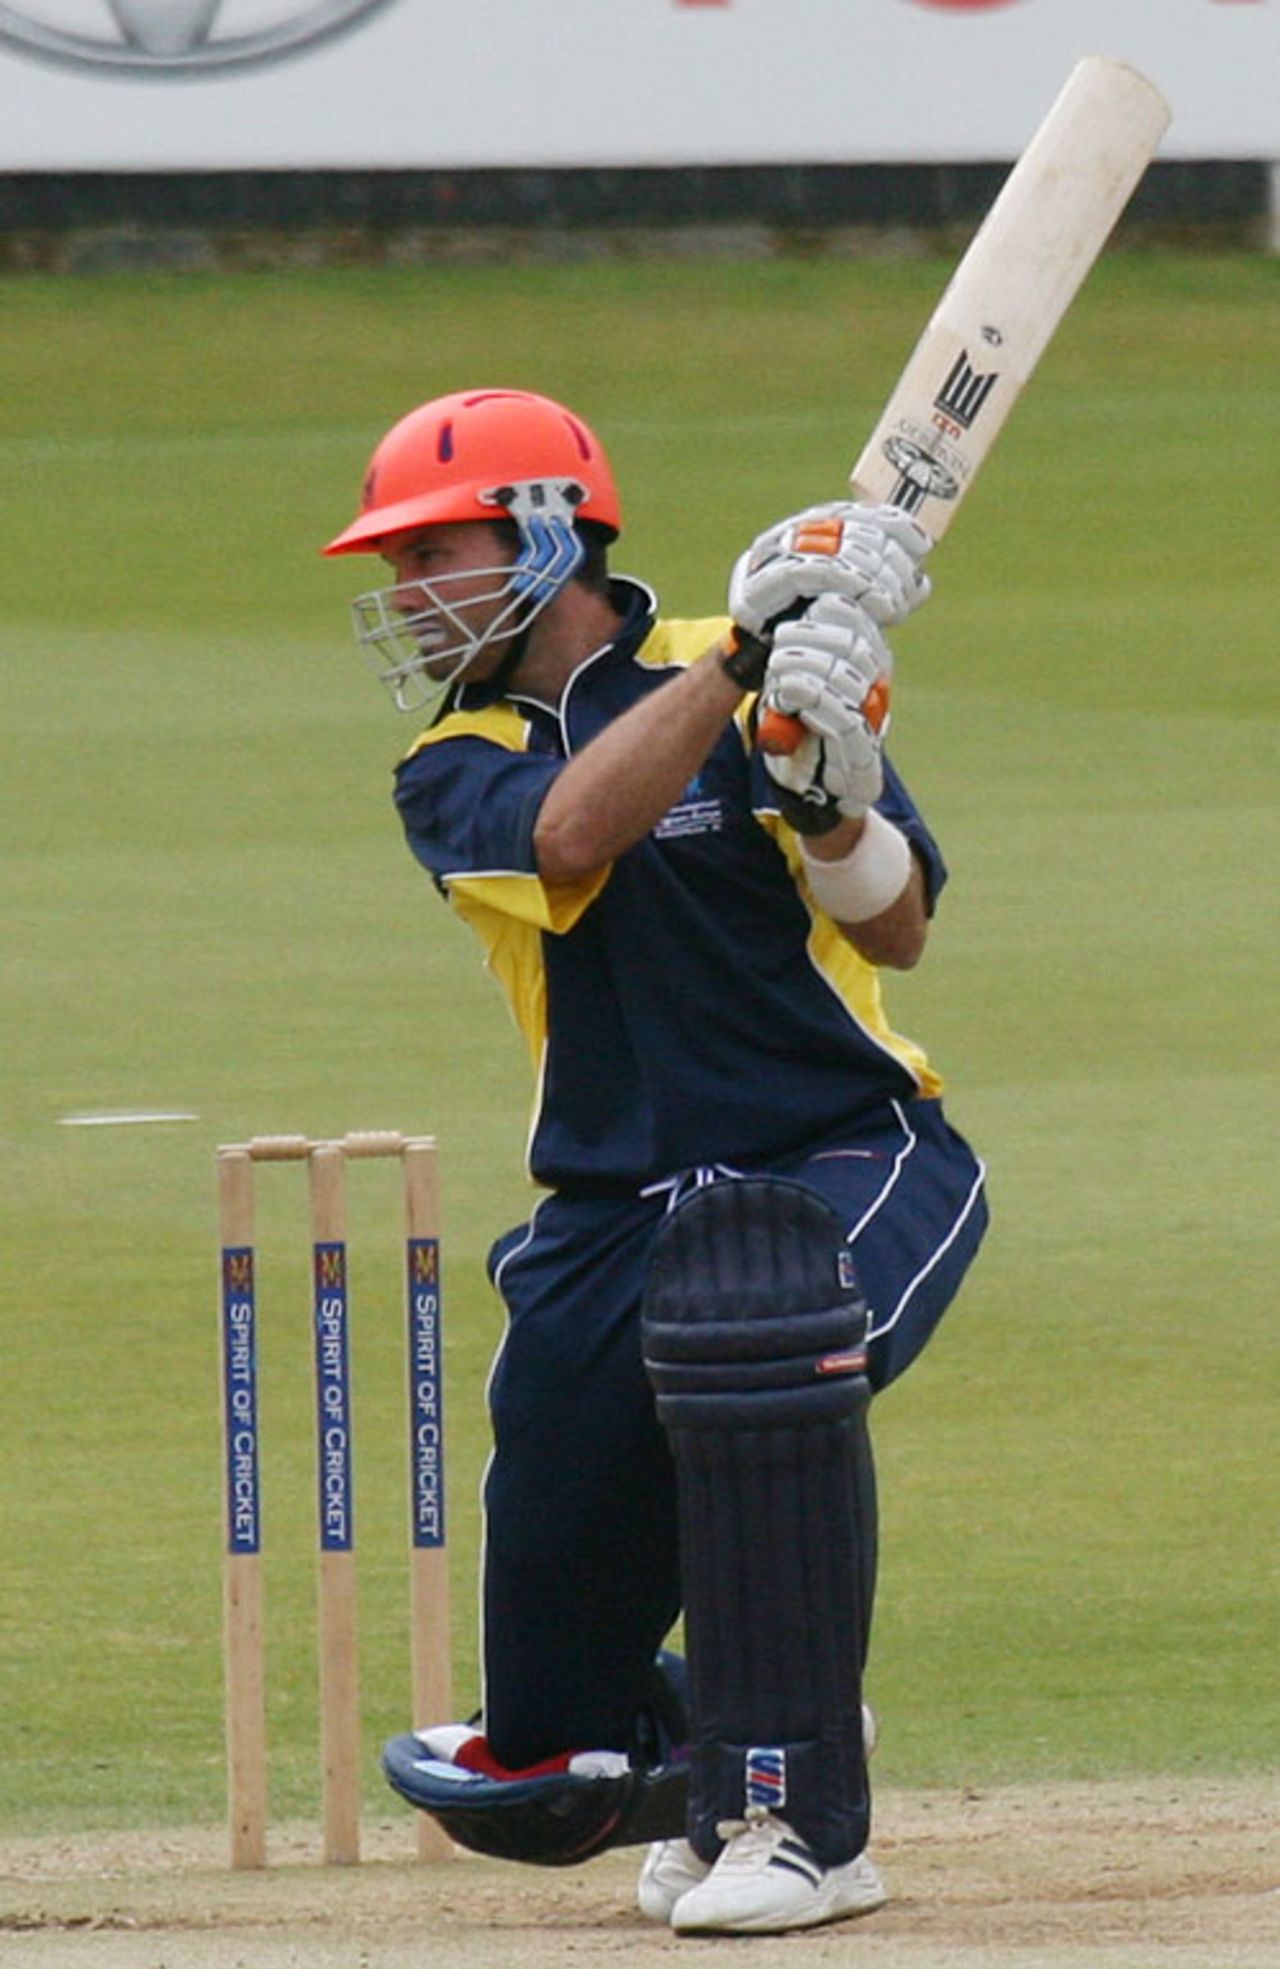 Bas Zuiderent on the attack, MCC v Europe, Lord's, June 7, 2007